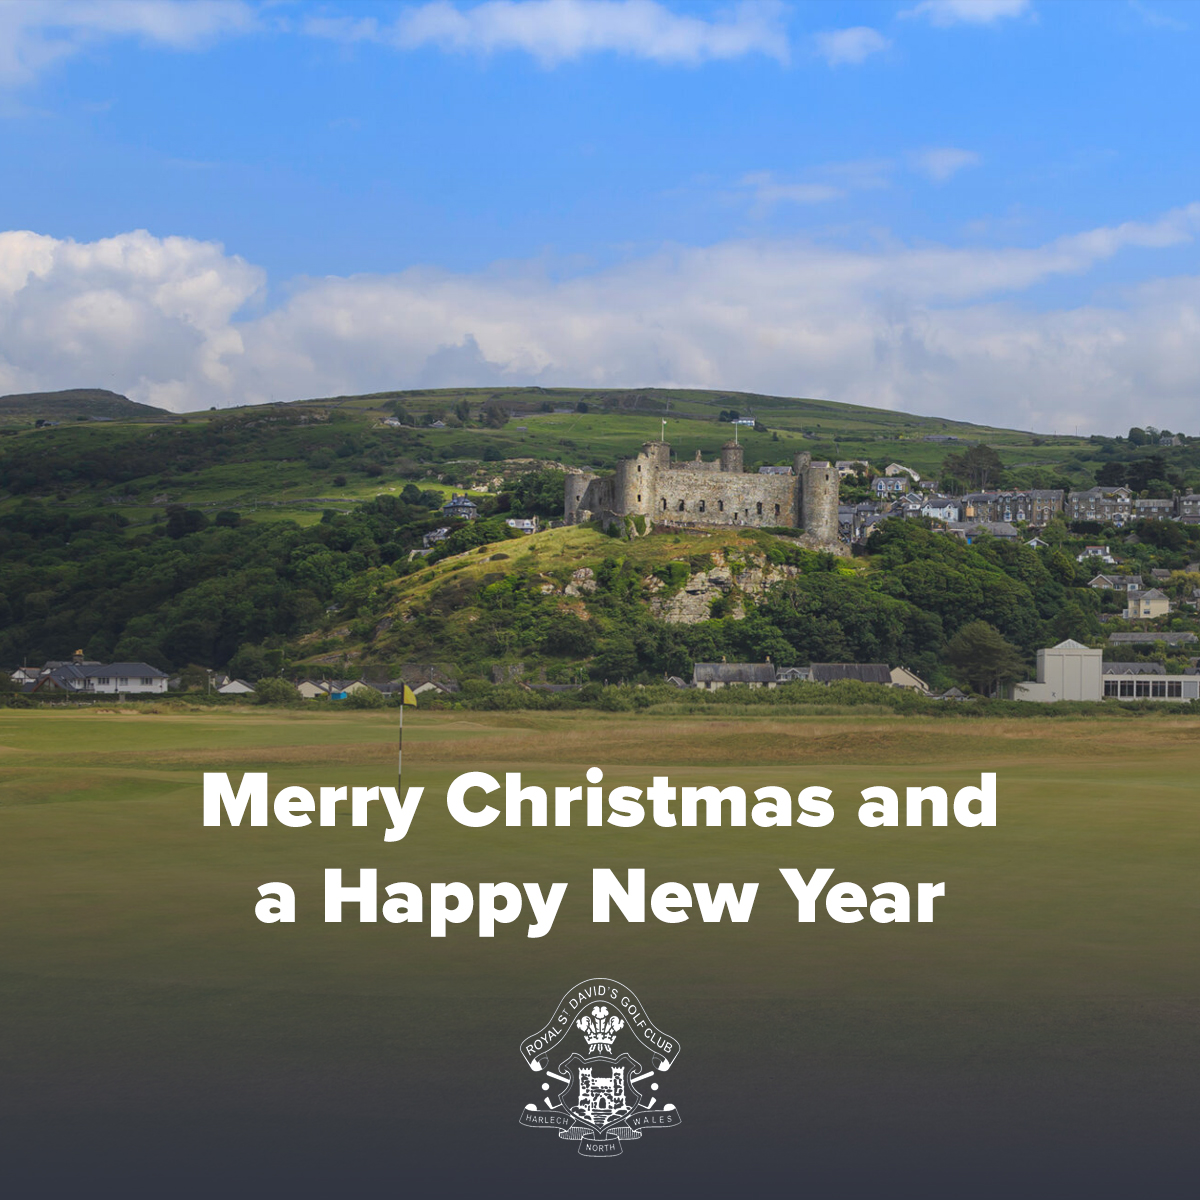 Wishing all our members, visitors and followers a Merry Christmas and a Happy New Year from everyone at Royal St. David's.